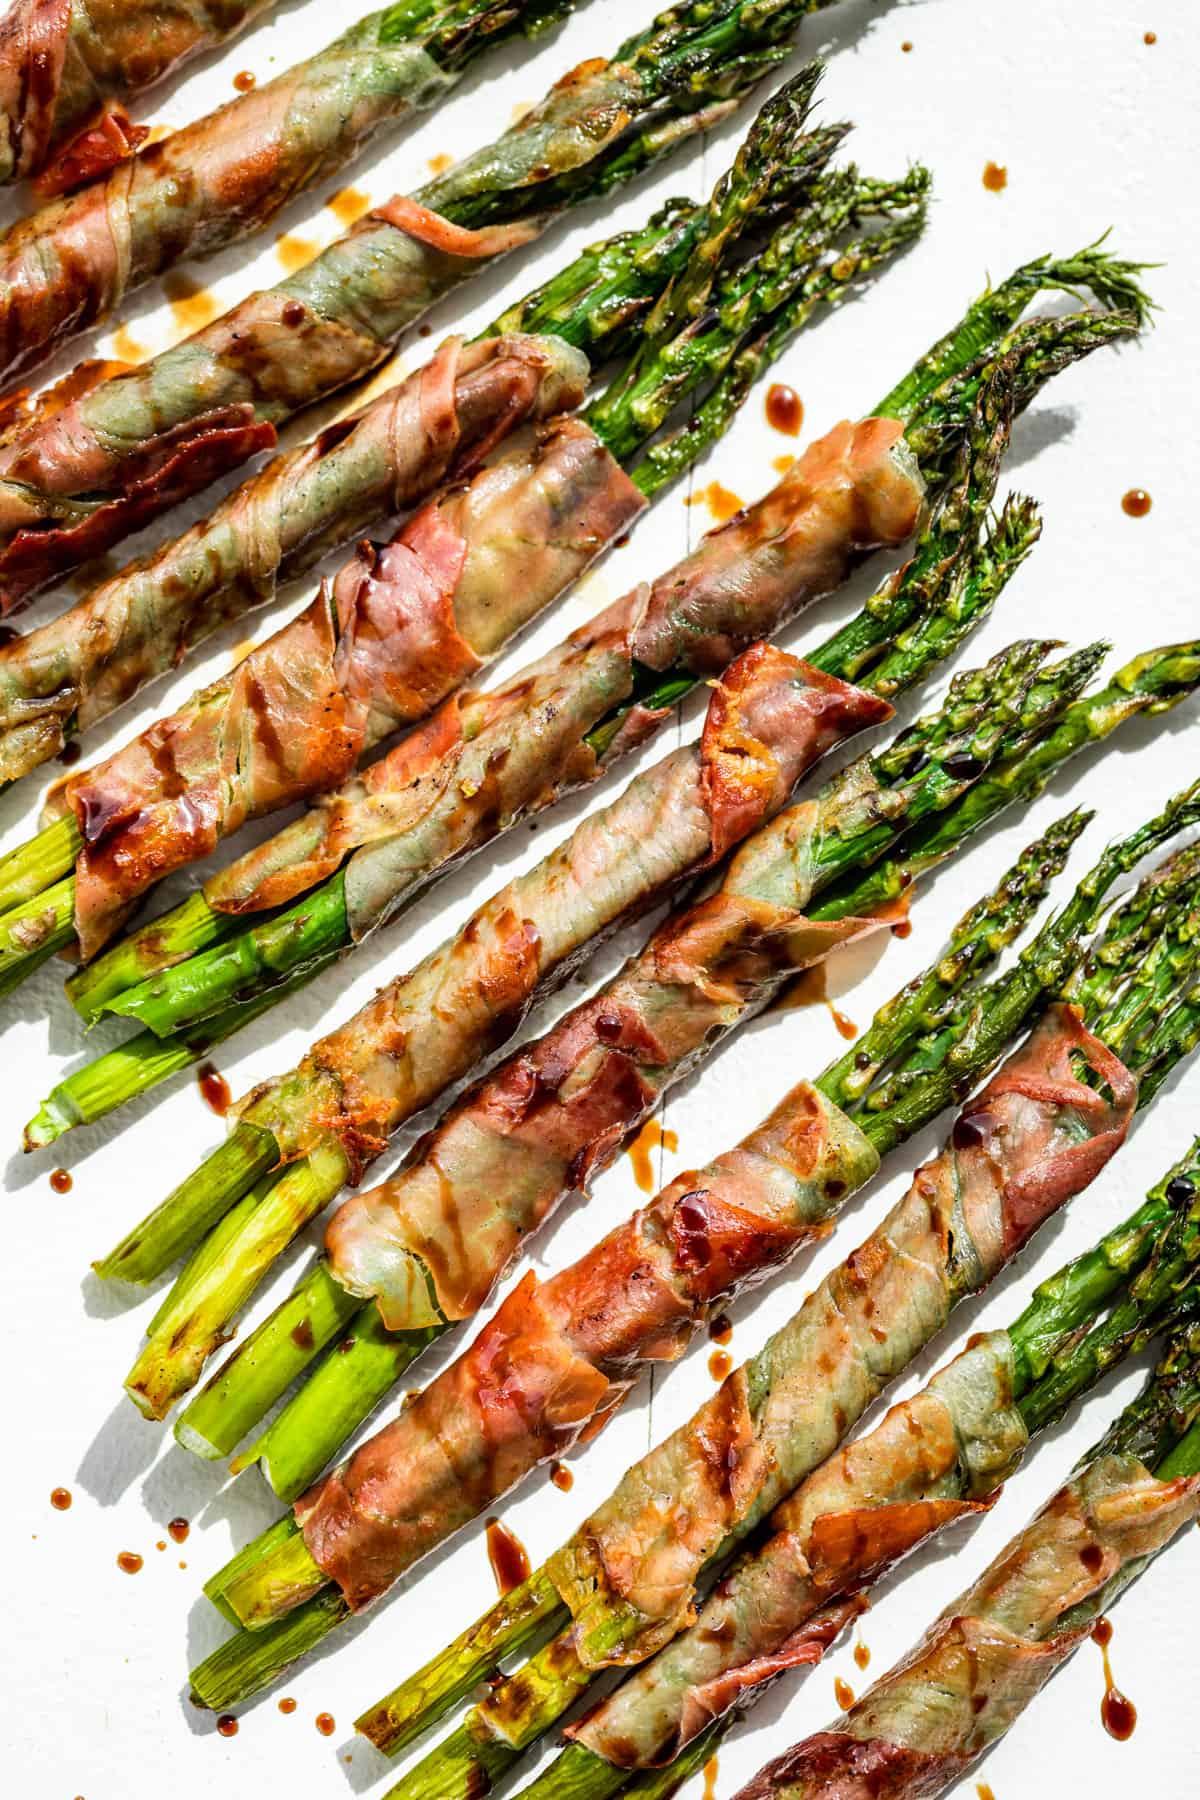 Looking down at Prosciutto Wrapped Asparagus drizzled with reduced balsamic vinegar on a white background.